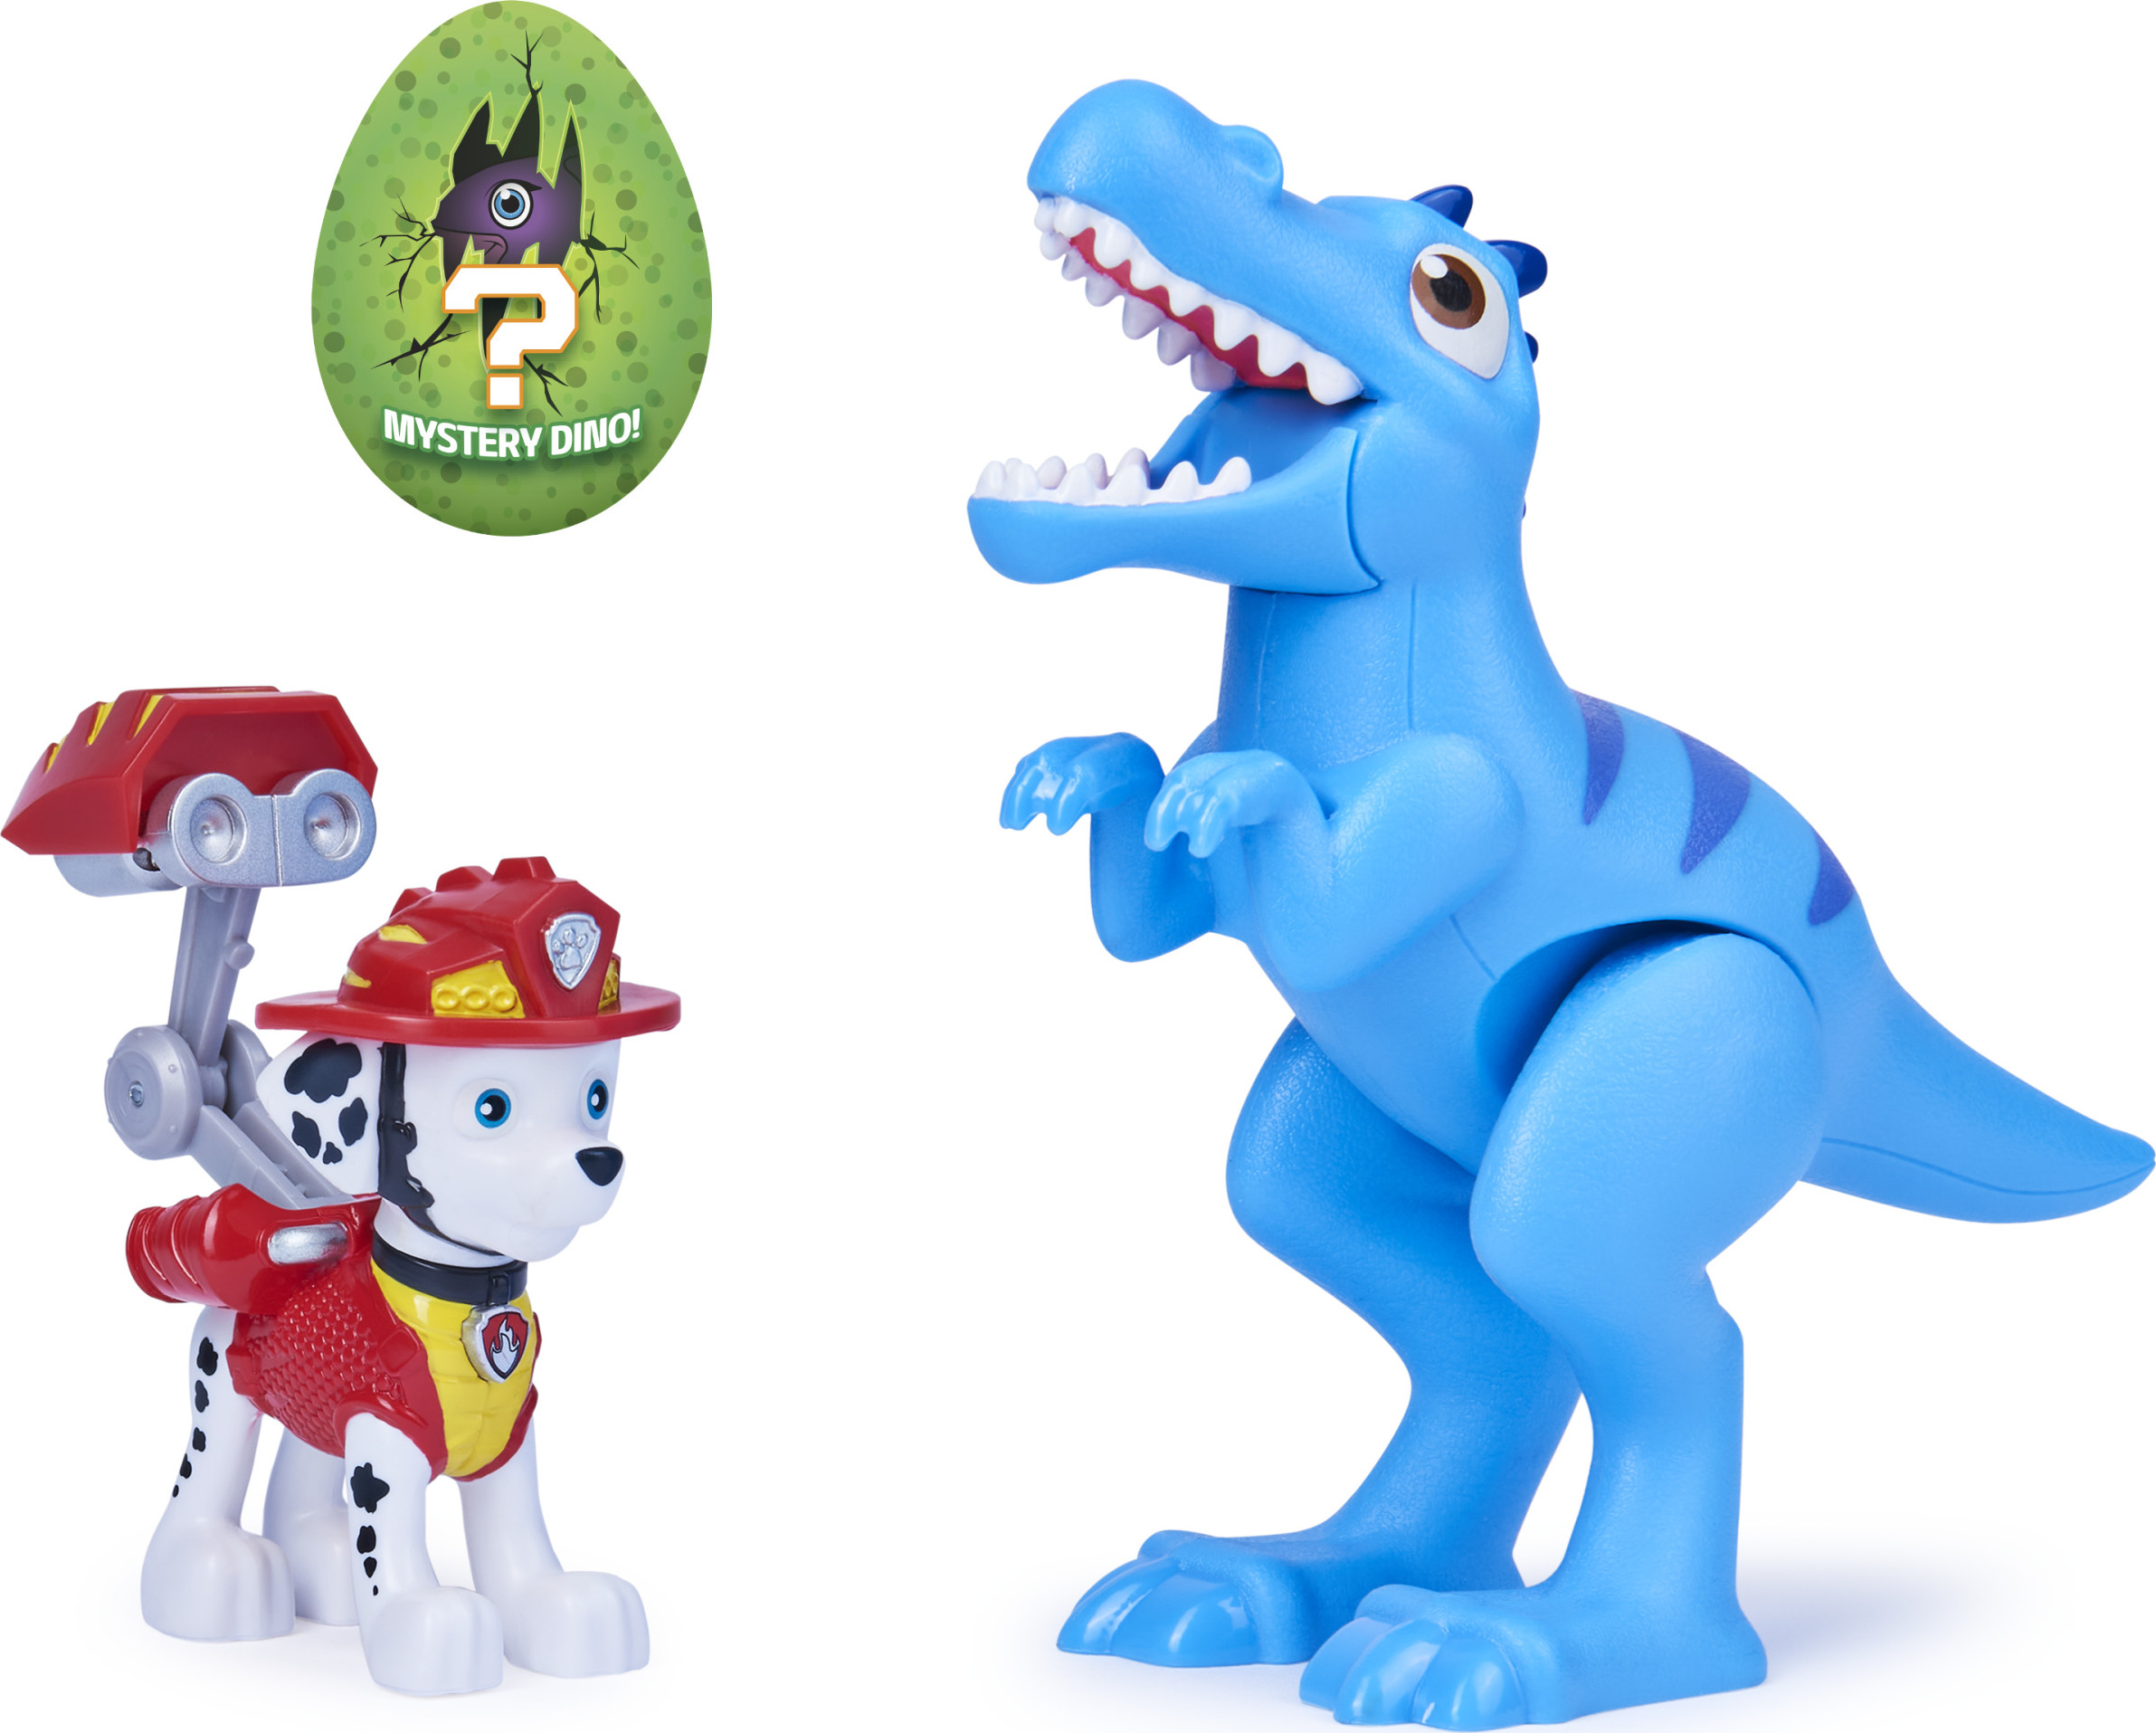 PAW Patrol, Dino Rescue Marshall and Dinosaur Action Figure Set, for Kids Aged 3 and up - image 1 of 5